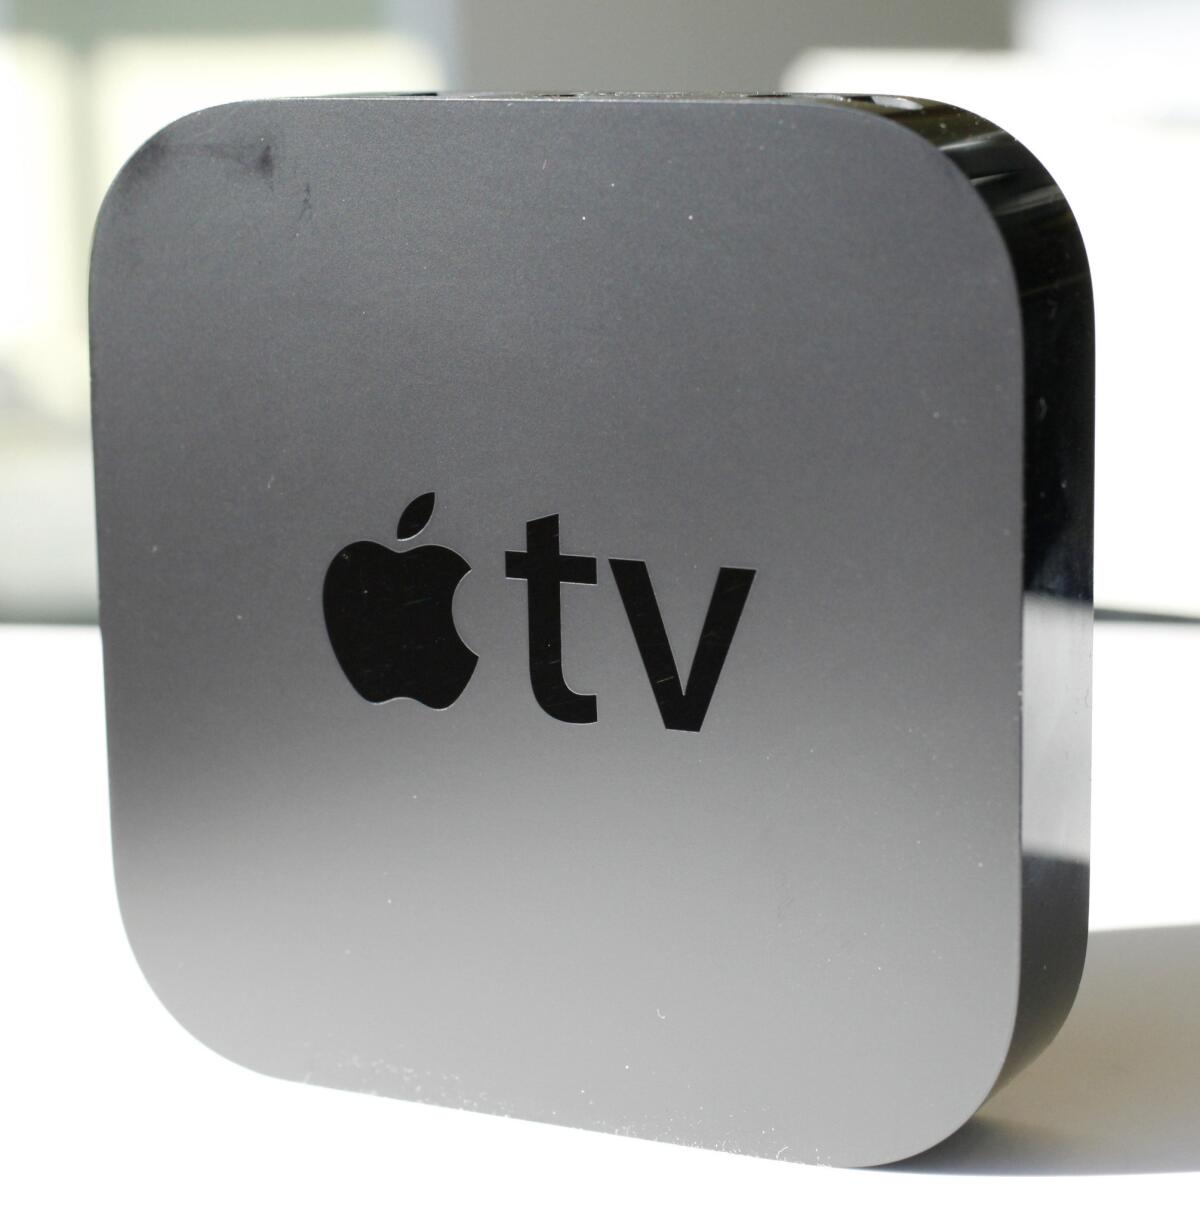 Apple stores are reportedly including $25 iTunes gift cards with sales of the $99 Apple TV.